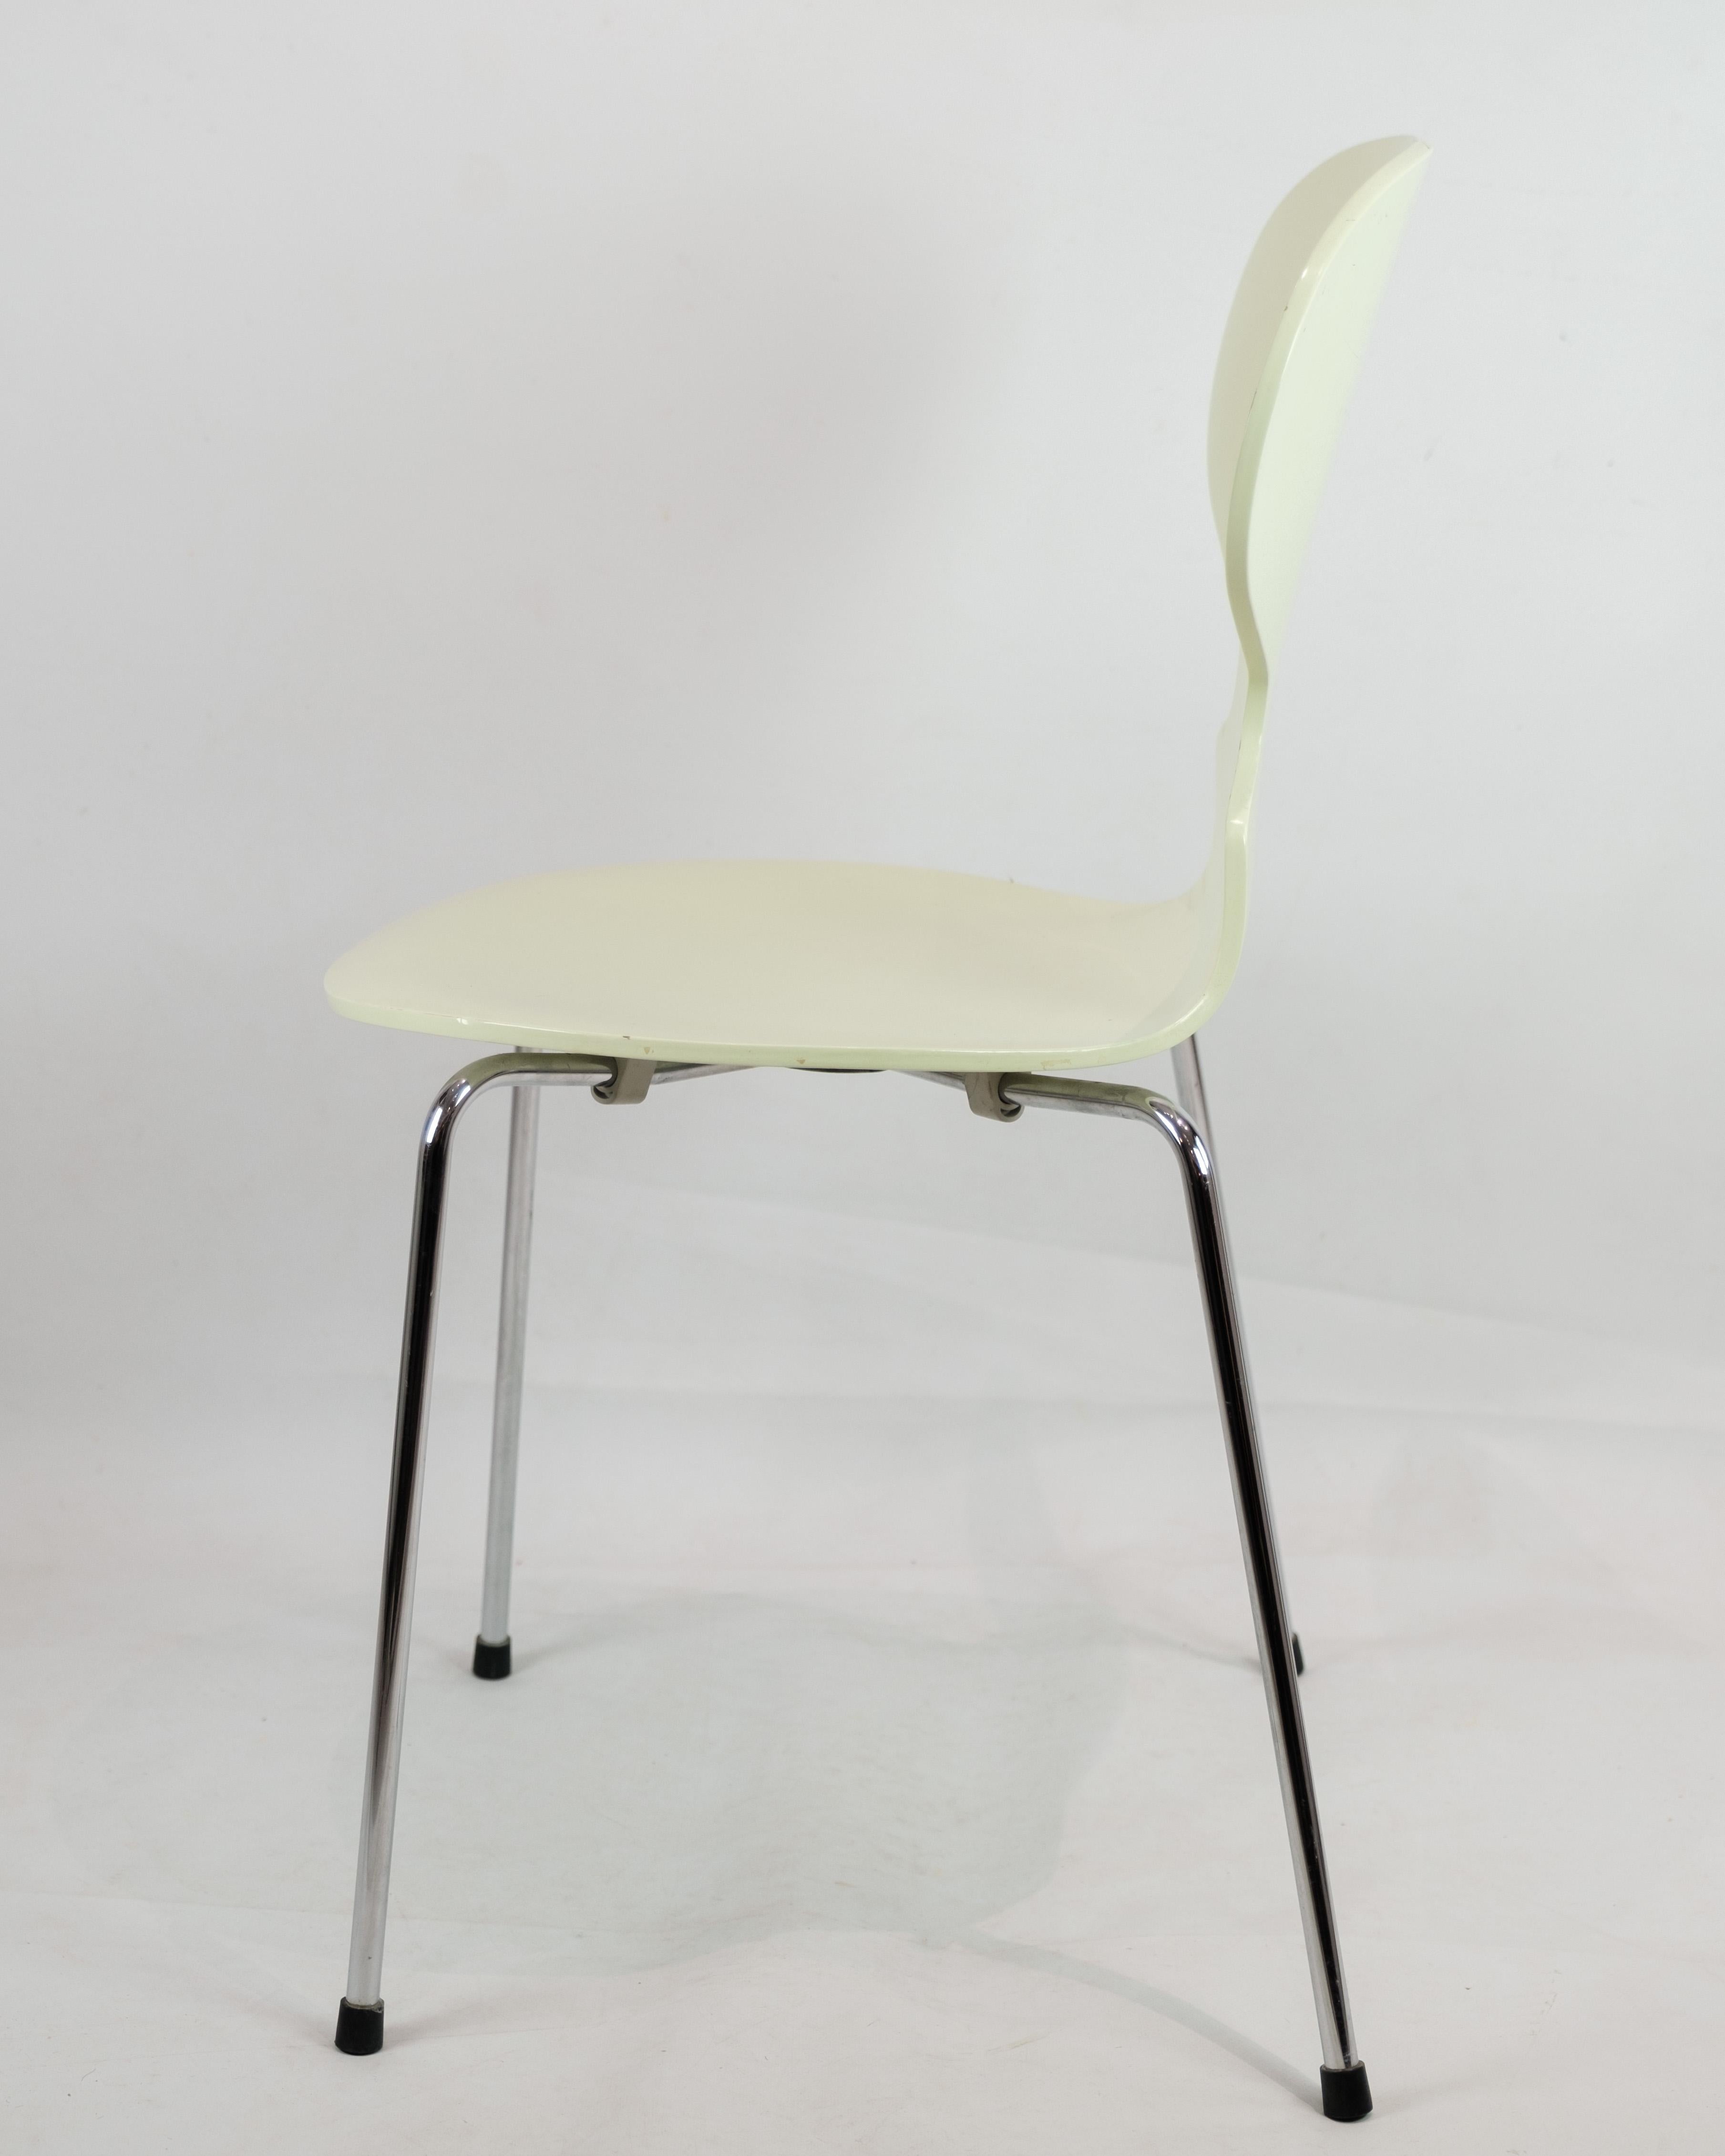 Late 20th Century Original Ant Chairs Model 3101 In Pastel Green By Arne Jacobsen From 1970s For Sale